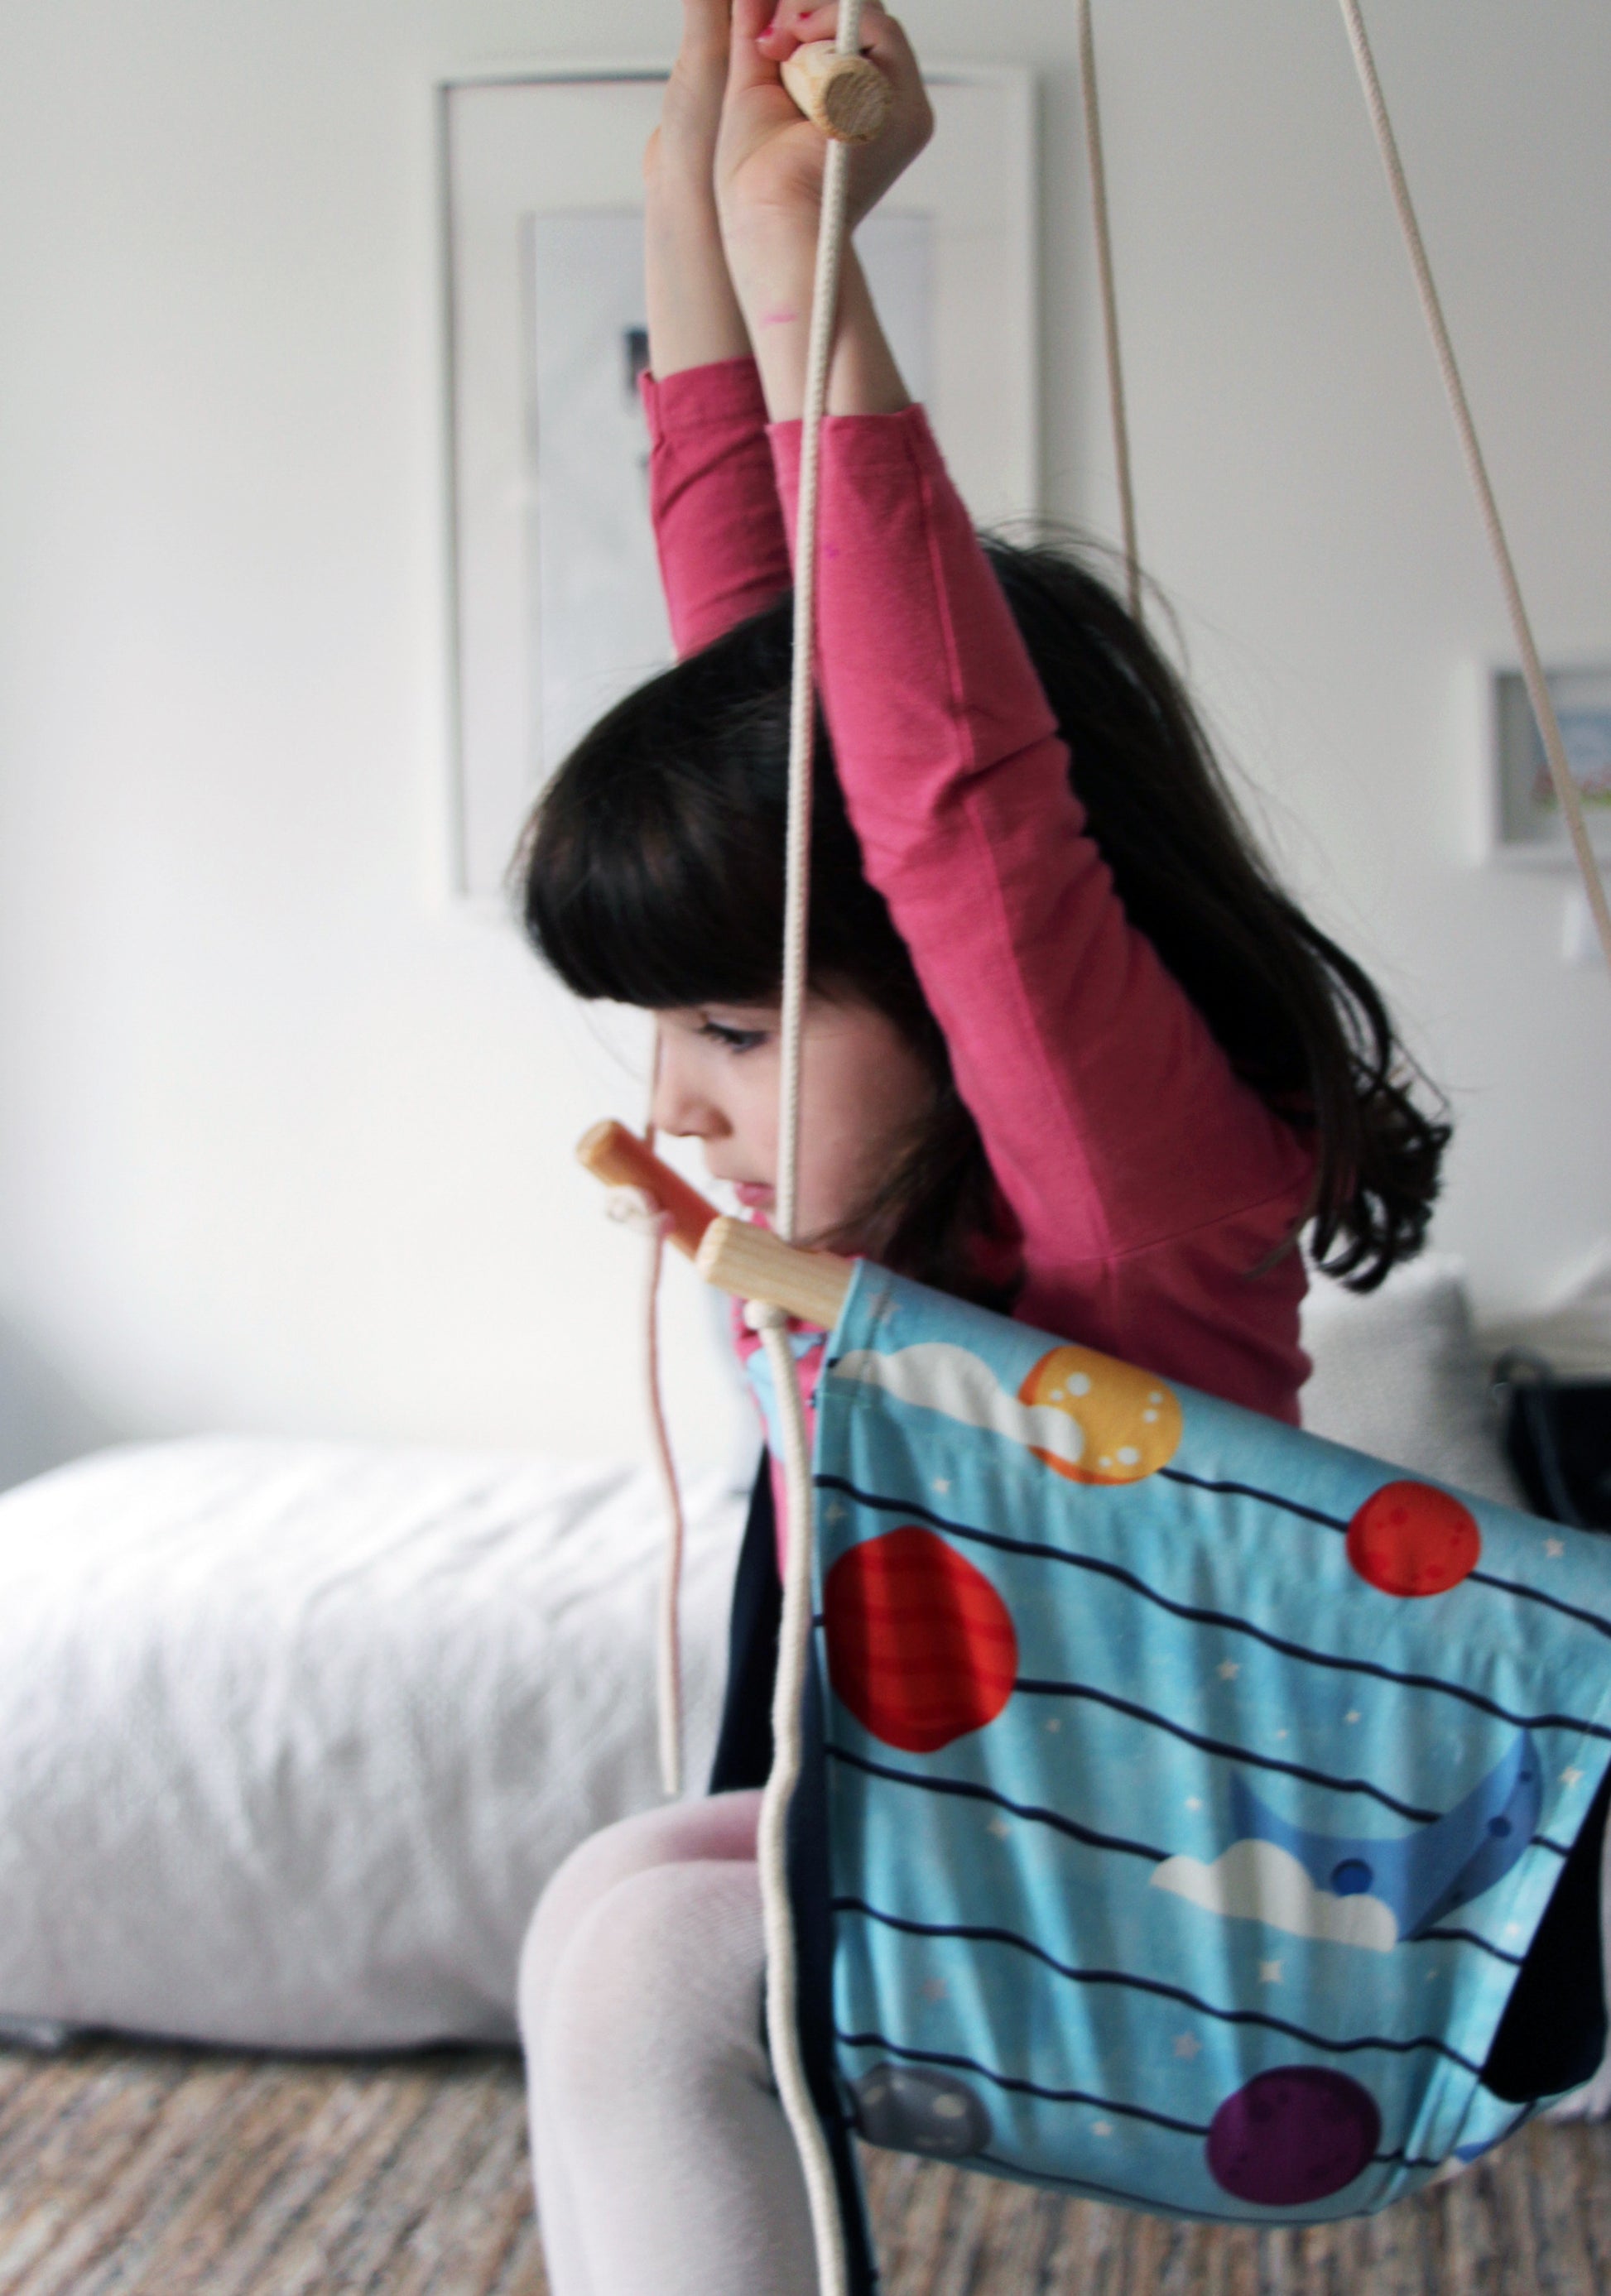 Blue Planets Baby Swing | BabySwing | Iberica - Pretty things from Portugal